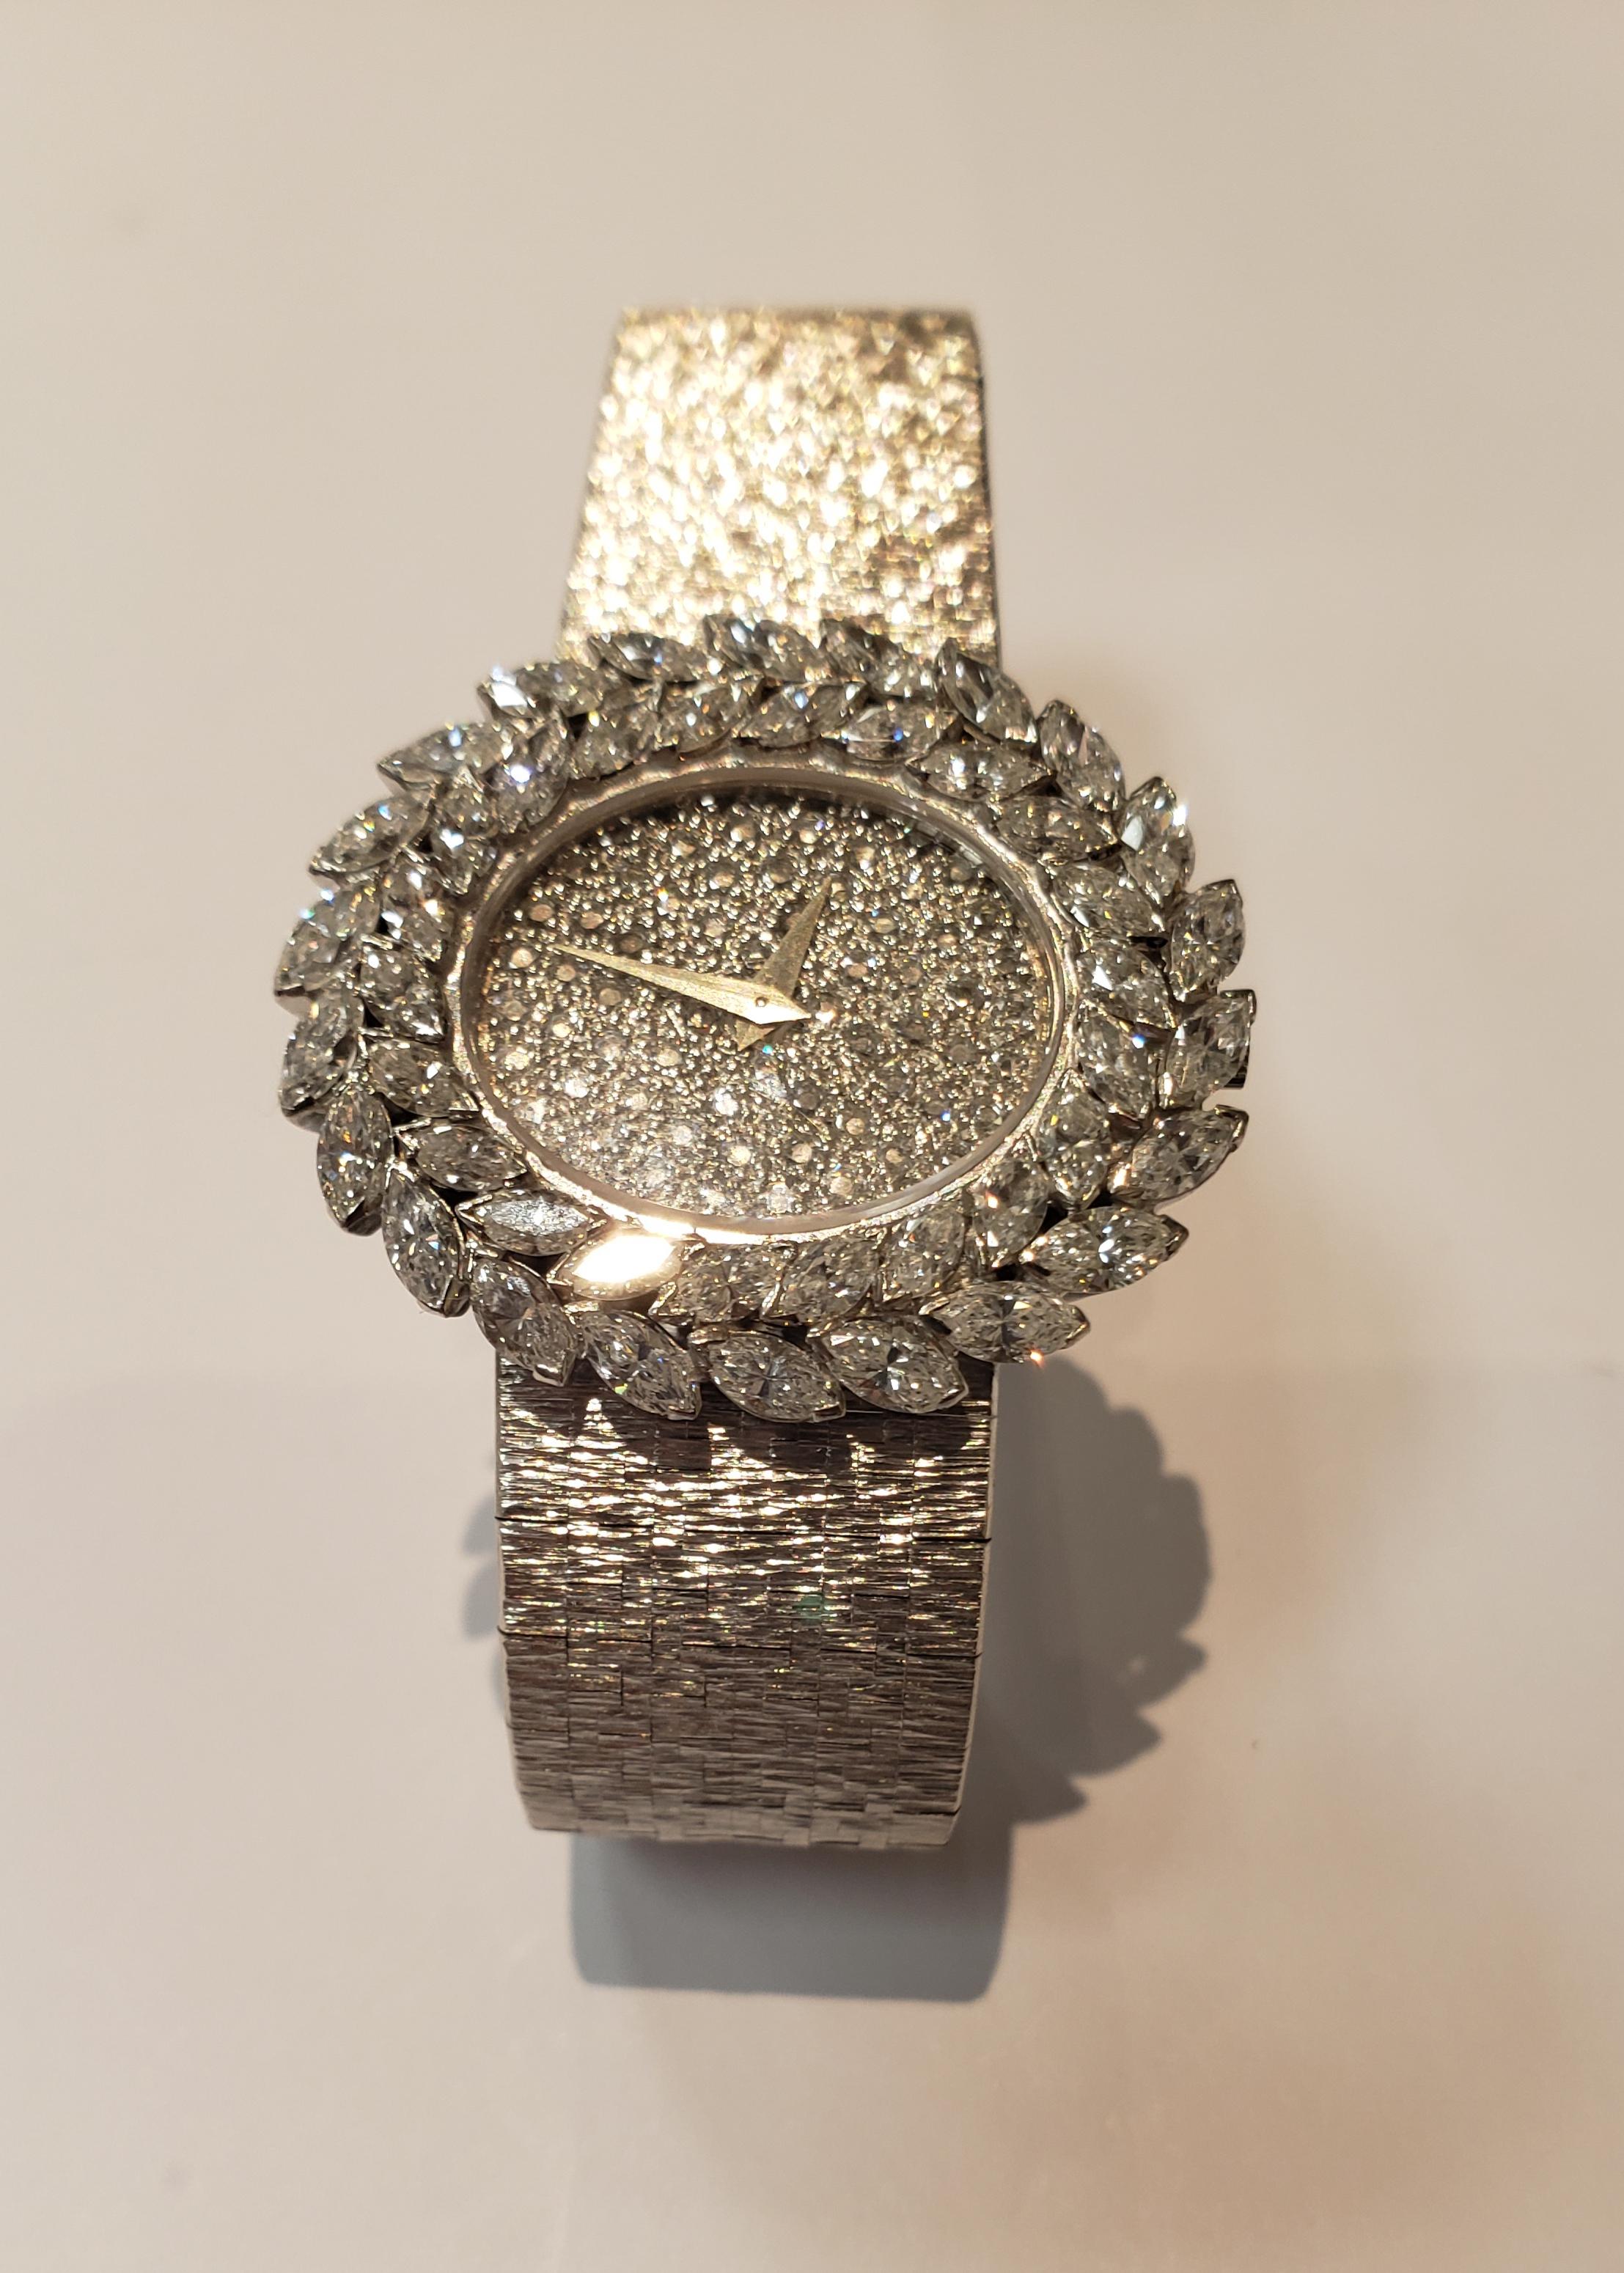 Circa 1980 ladies' 18 karat white gold Piaget watch with an east west oval pave diamond dial and a marquise diamond laurel leaf design bezel. Watch is on a textured integrated bracelet. Manual wind movement. Swiss made. Watch contains 4 carats total